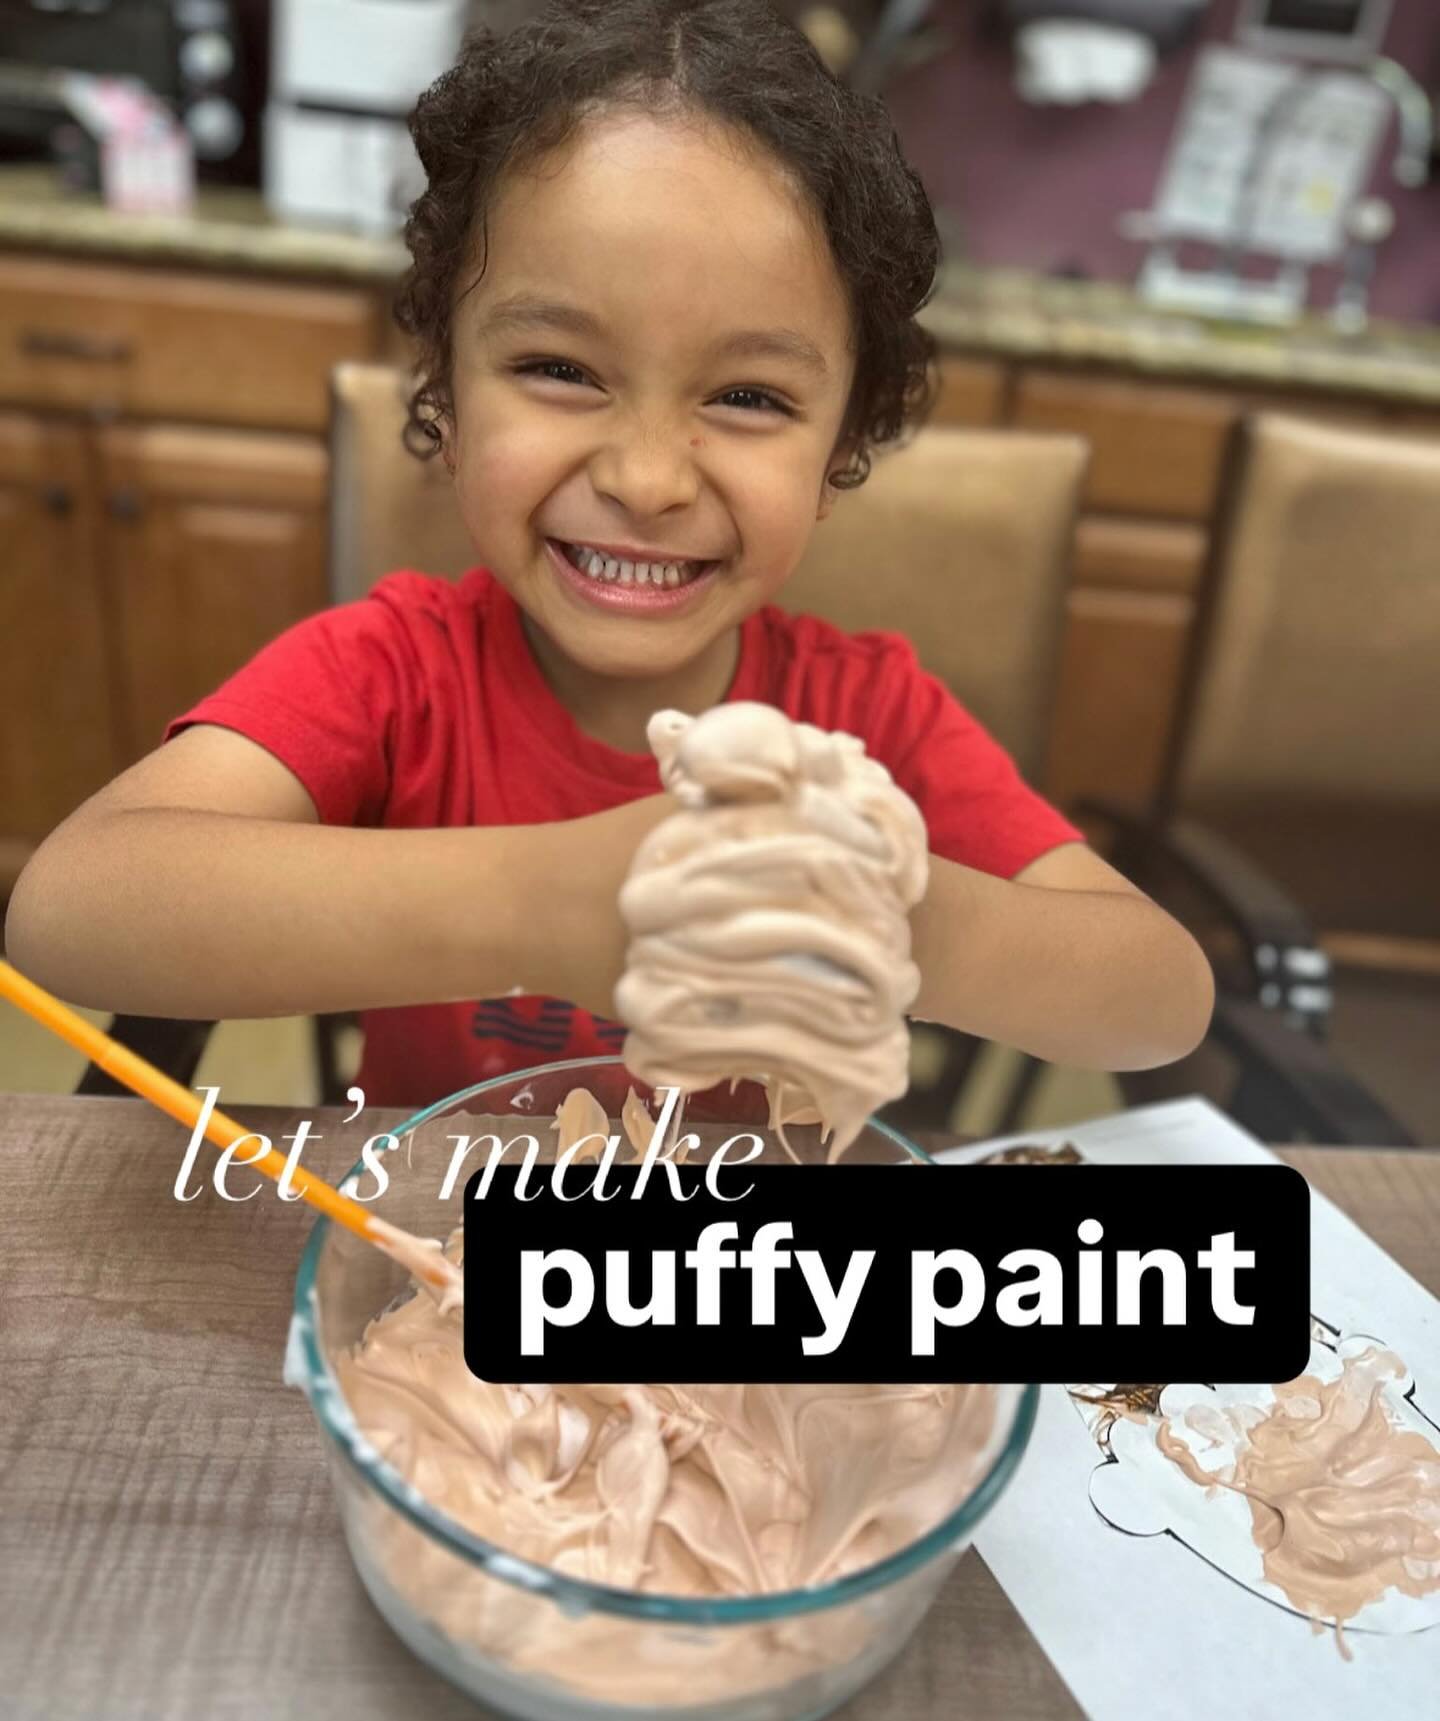 We had so much fun using puffy paint to make an ice cream cone in OT using a template from @toolstogrow !Puffy Paint is a great way to work on sequencing steps and sensory processing. 

To make our puffy paint, we used about equal parts glue and shav